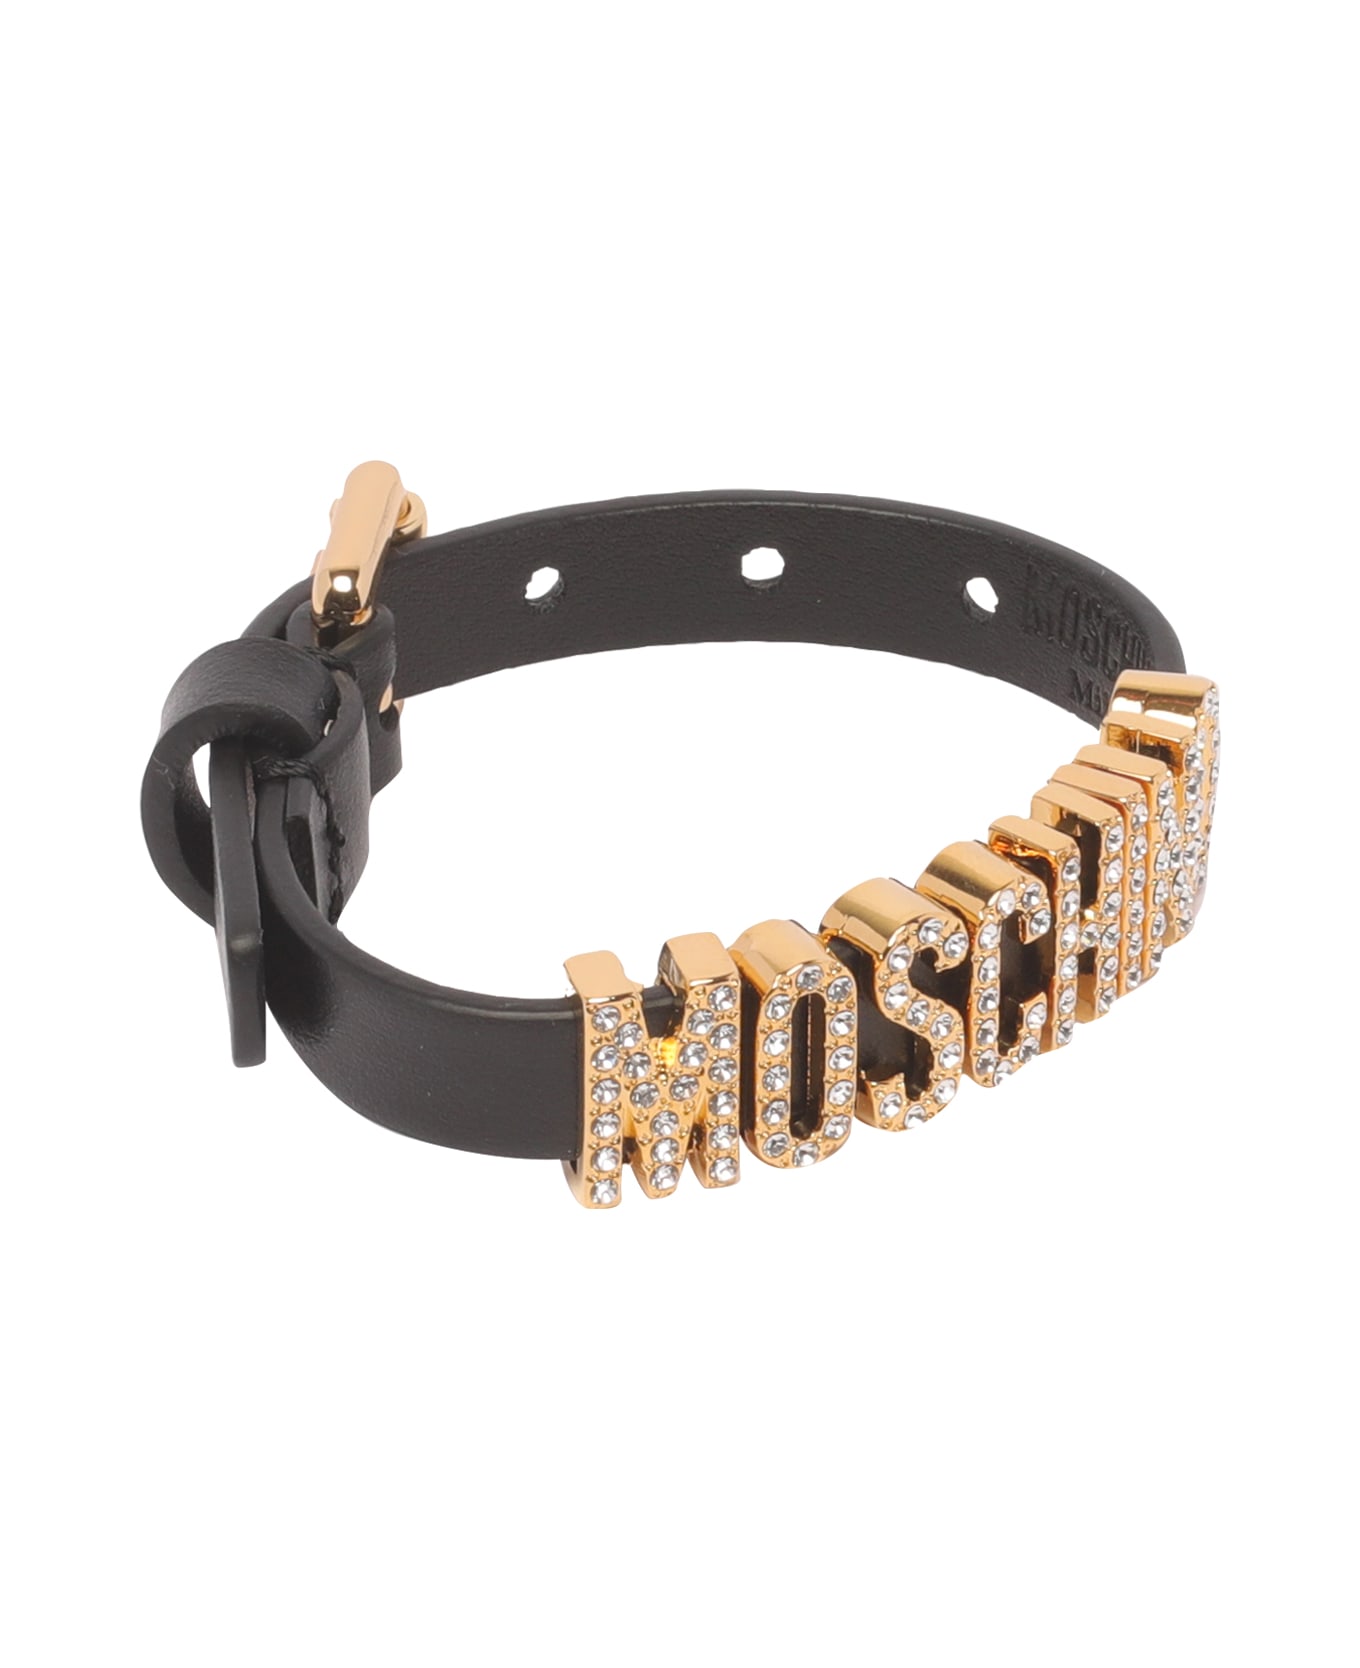 Moschino Crystal Lettering Bracelet - Black ブレスレット